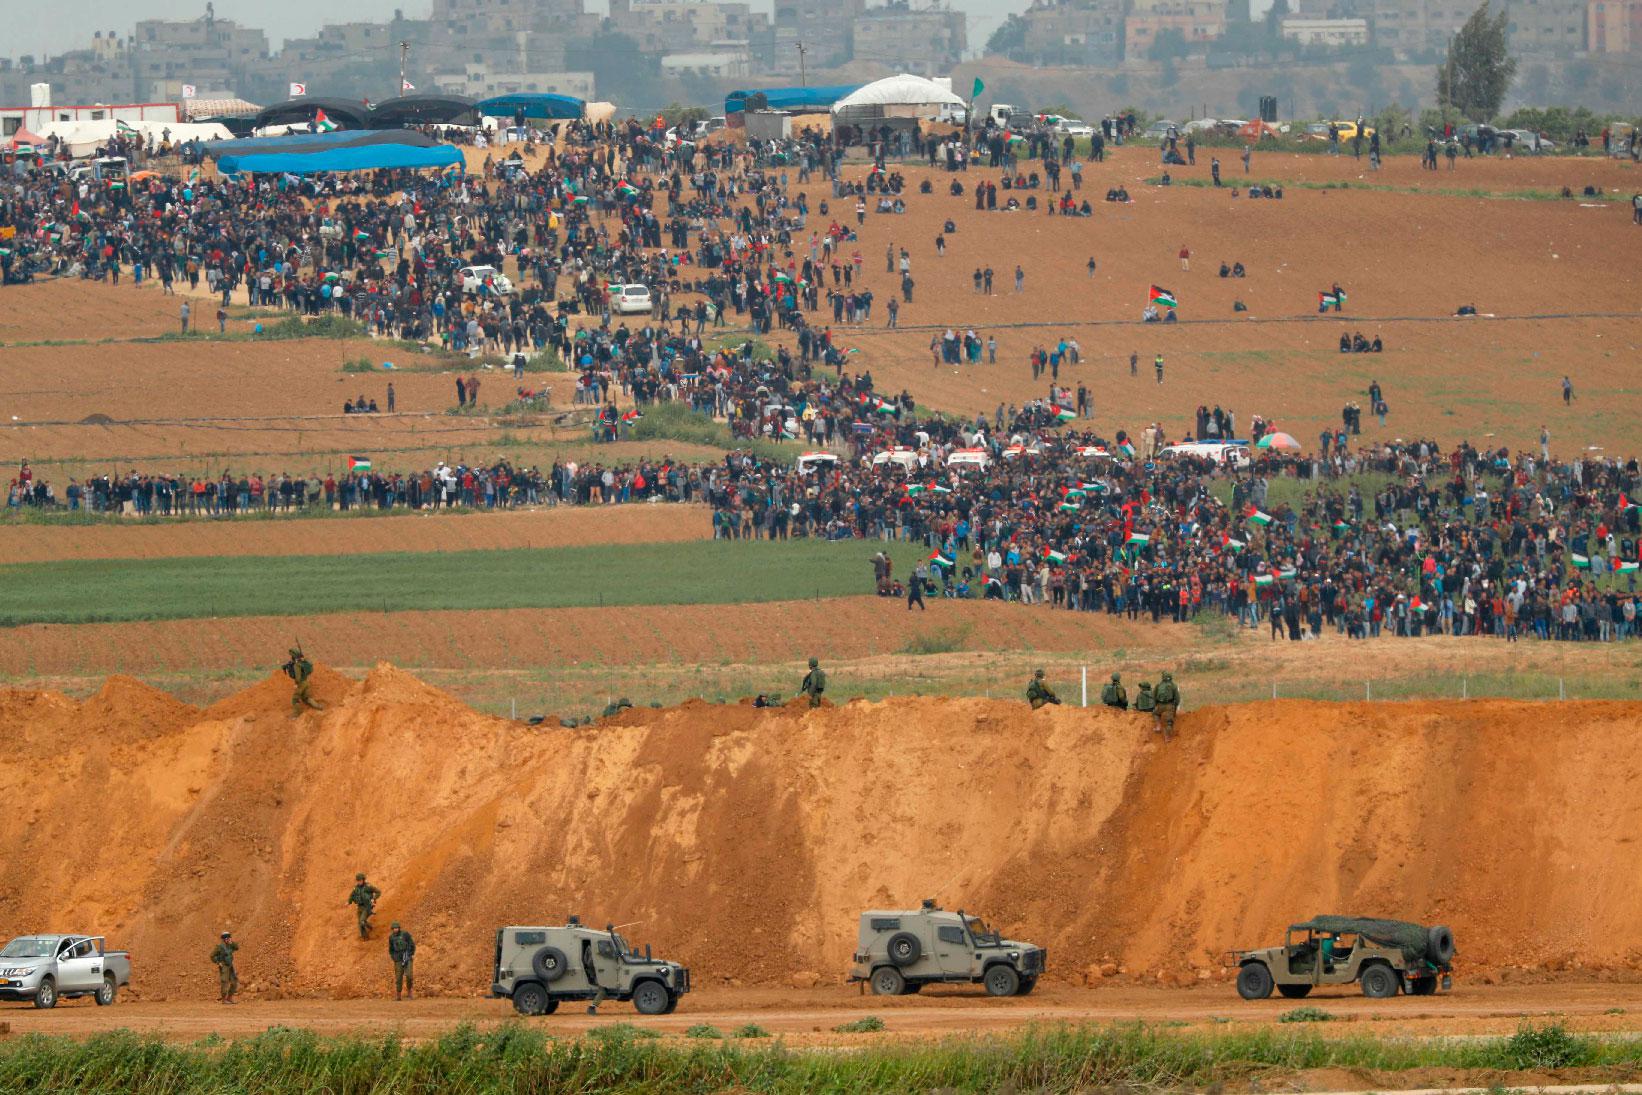 In this file photo taken on March 30, 2018 from the southern Israeli kibbutz of Nahal Oz across the border from the Gaza Strip, Palestinians participating in a tent city protest commemorating Land Day, with Israeli military vehicles seen below in the foreground.